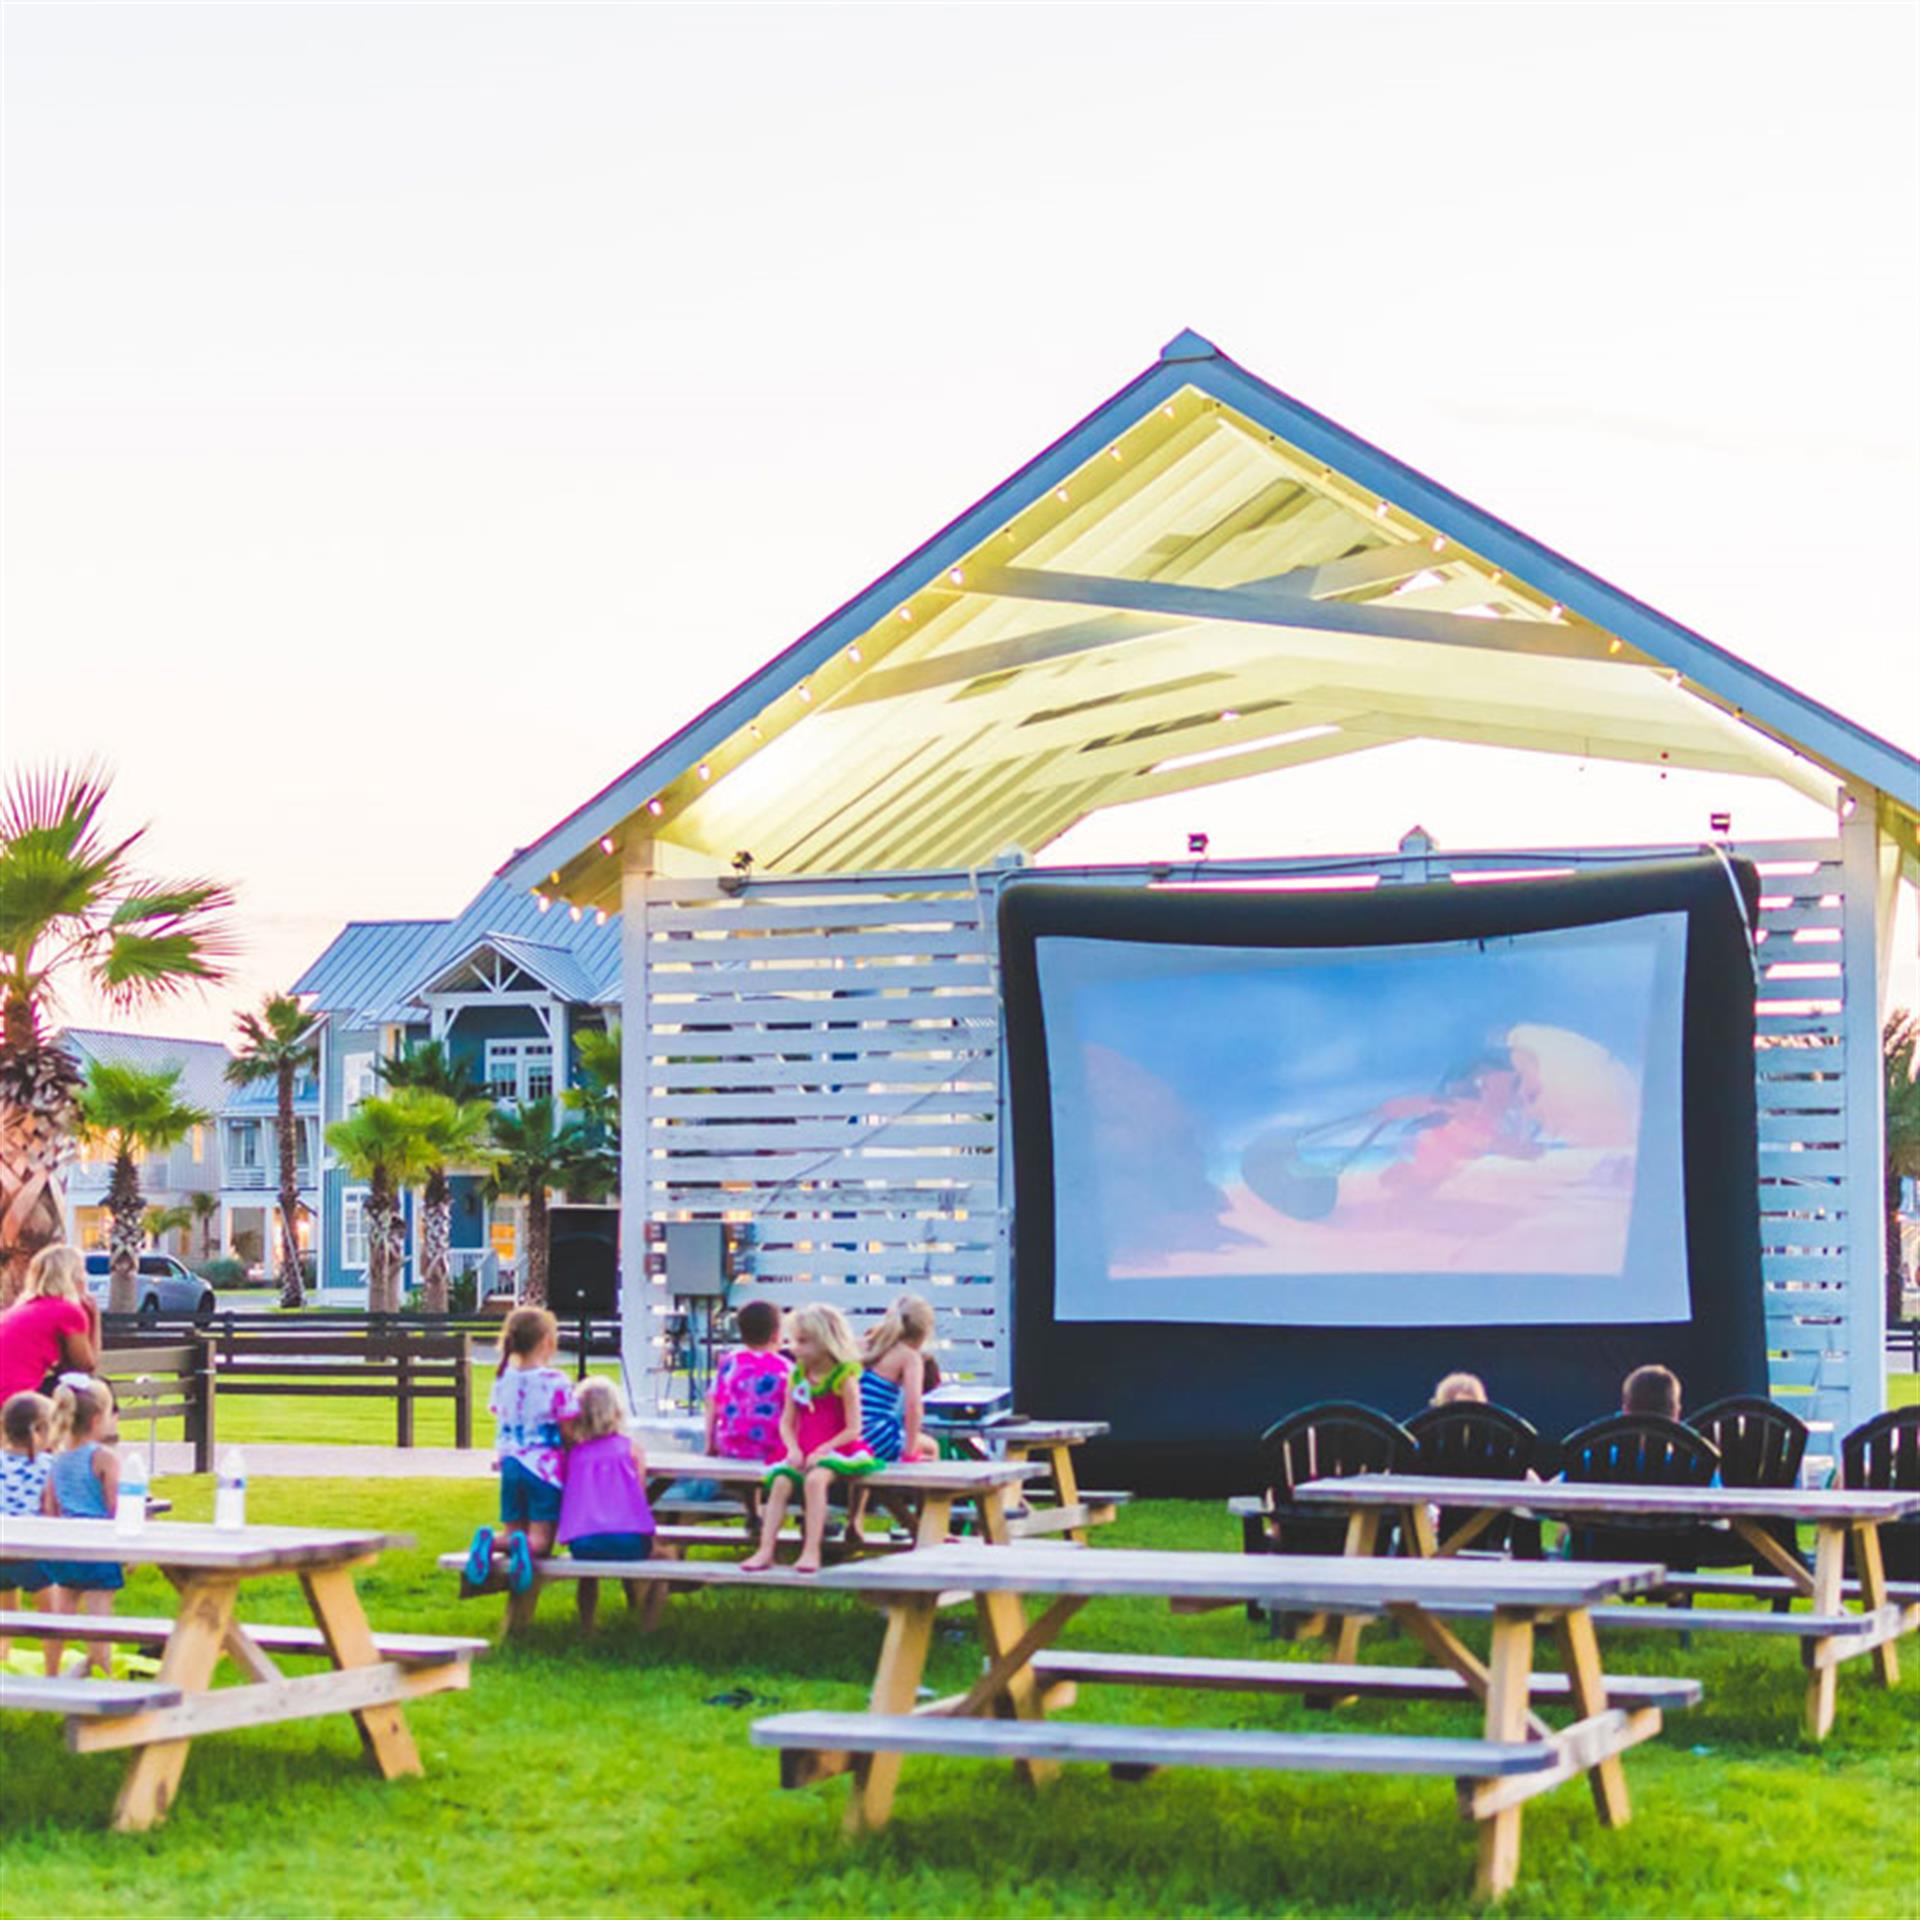 Movies on the Lawn